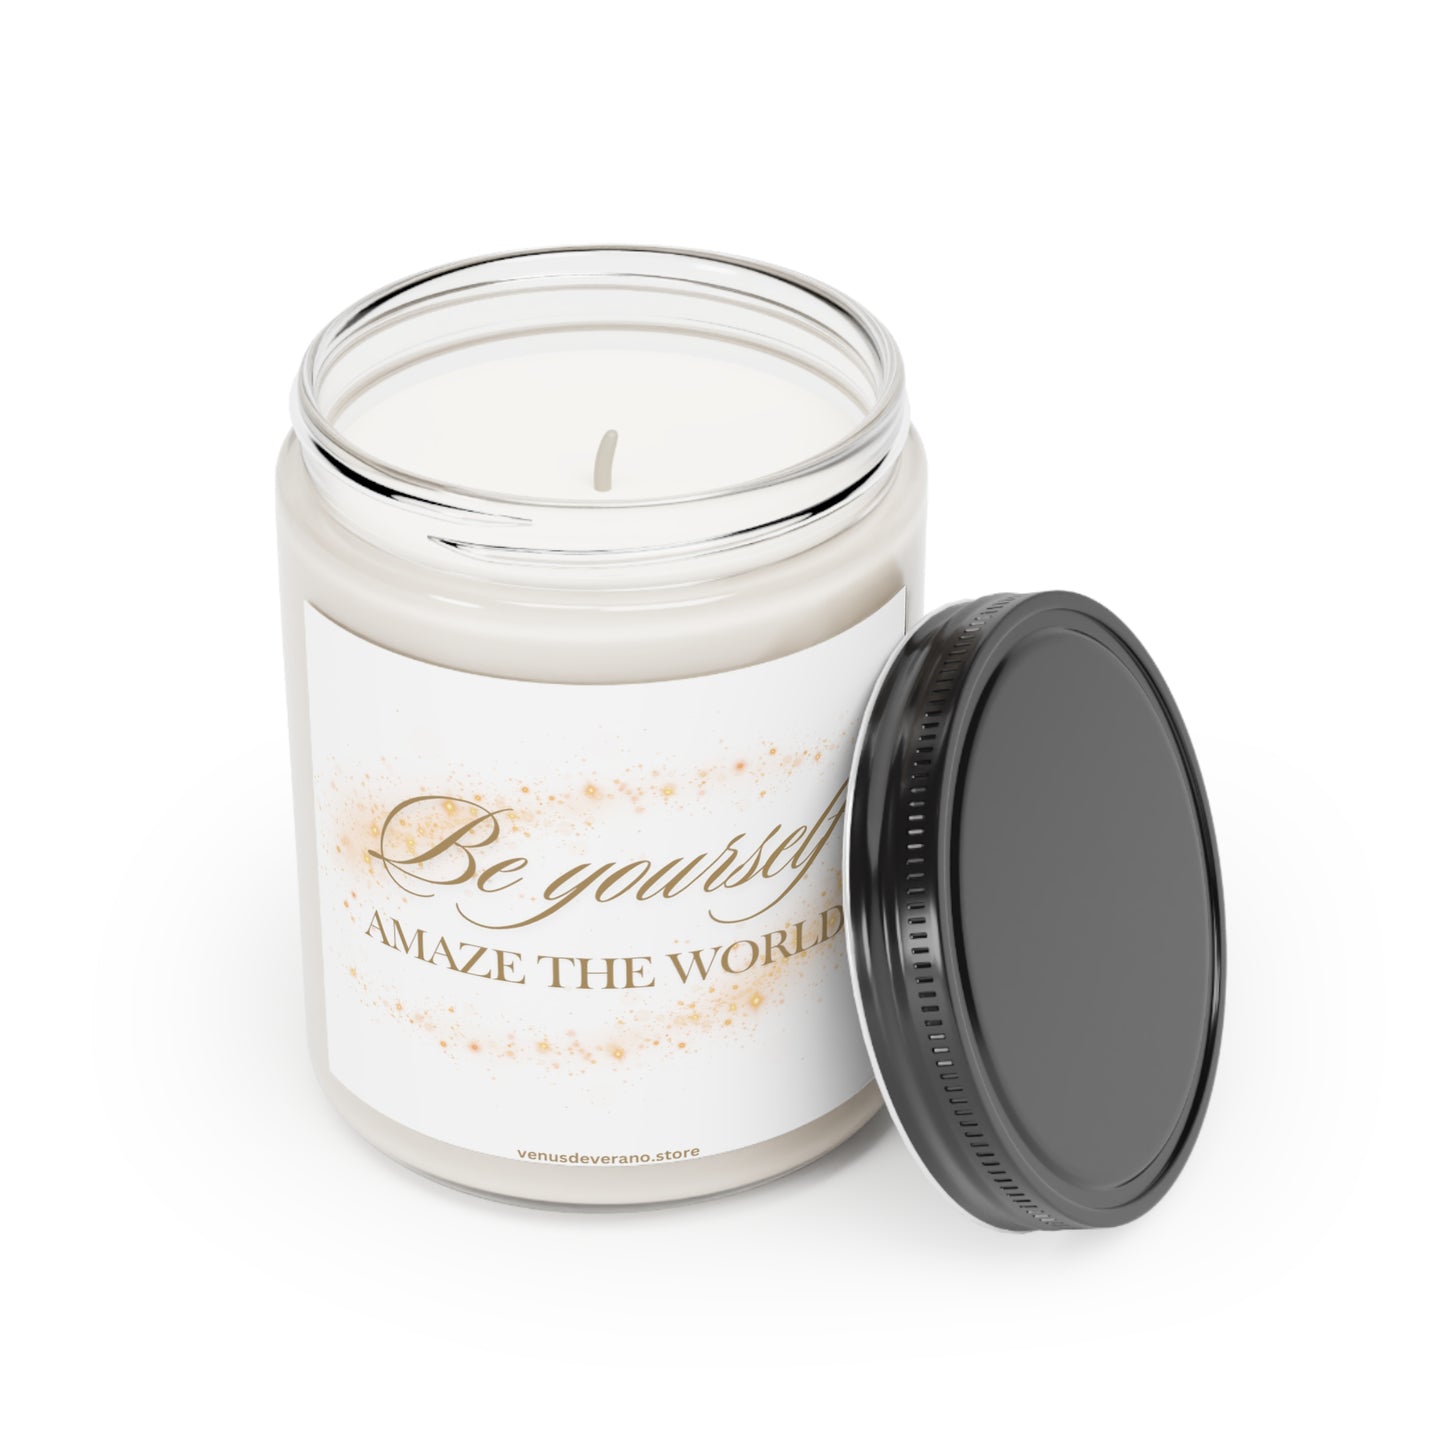 Scented Candle, 9oz - BE YOURSELF Amaze the World - Made from vegan soy coconut wax, hand-poured | 2 ambrosial fragrances available, Cinnamon Stick and Vanilla.